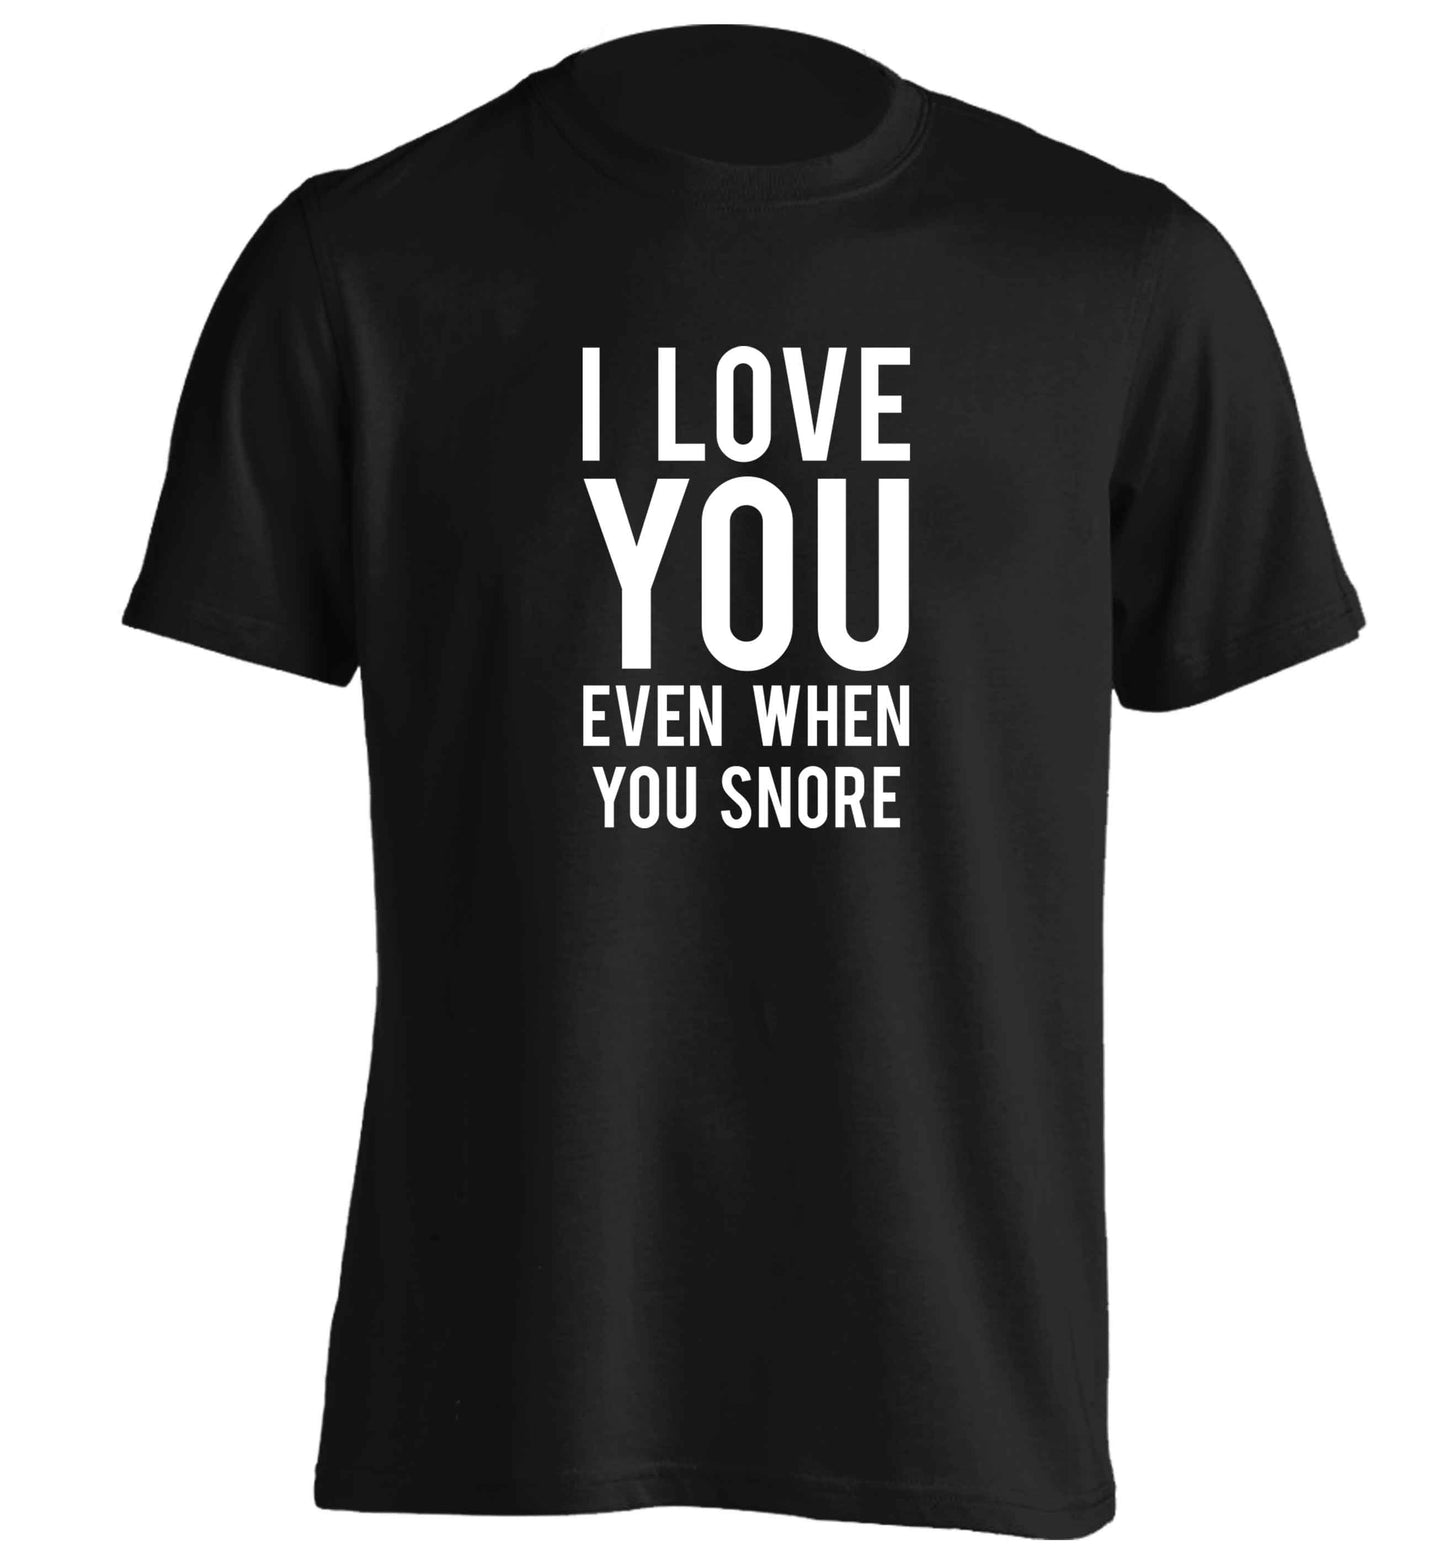 I love you even when you snore adults unisex black Tshirt 2XL